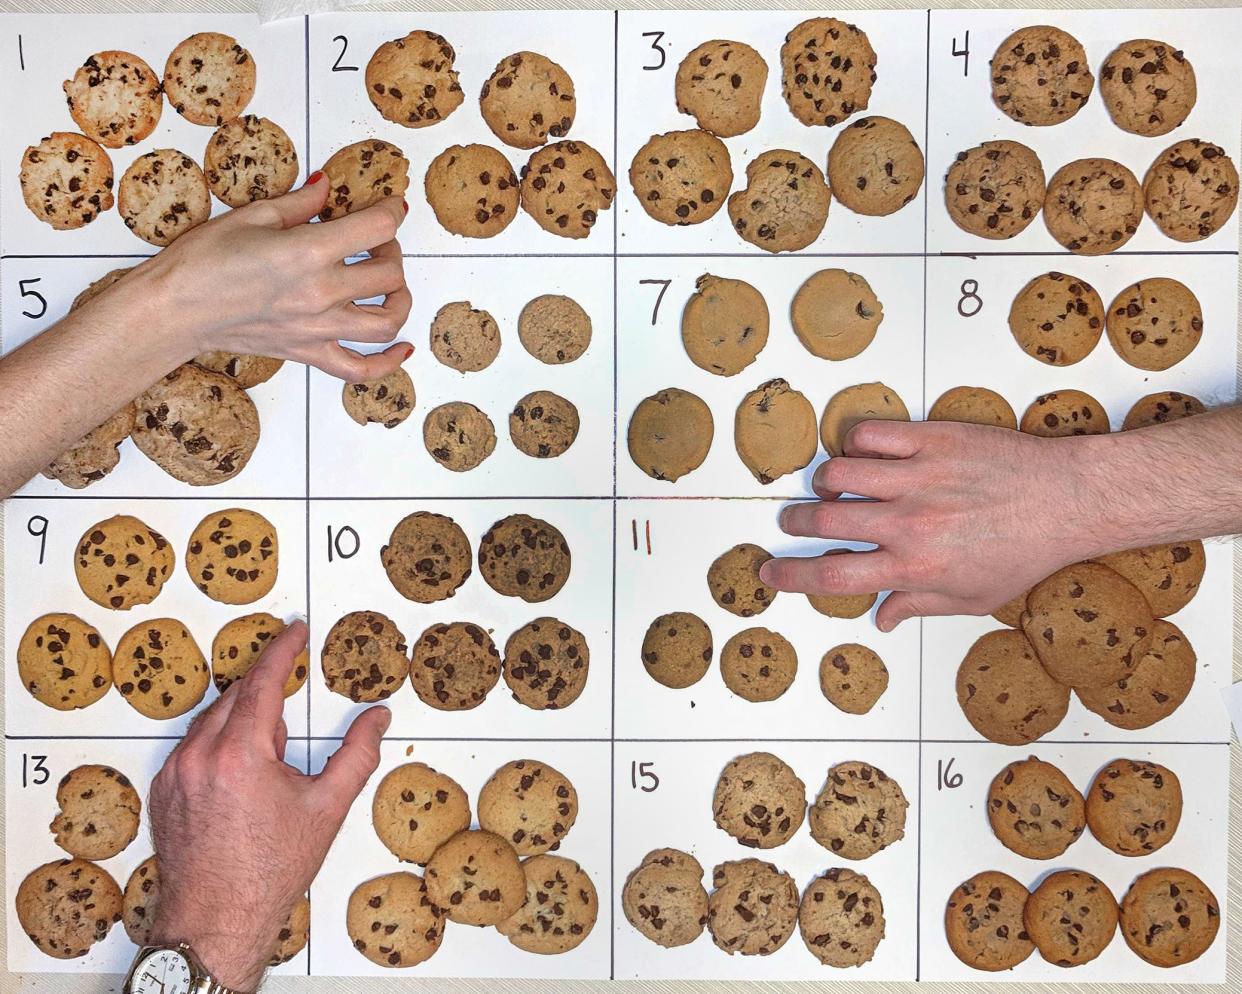 chocolate chip cookies laid out and numbered on posterboard, hands reaching for cookies